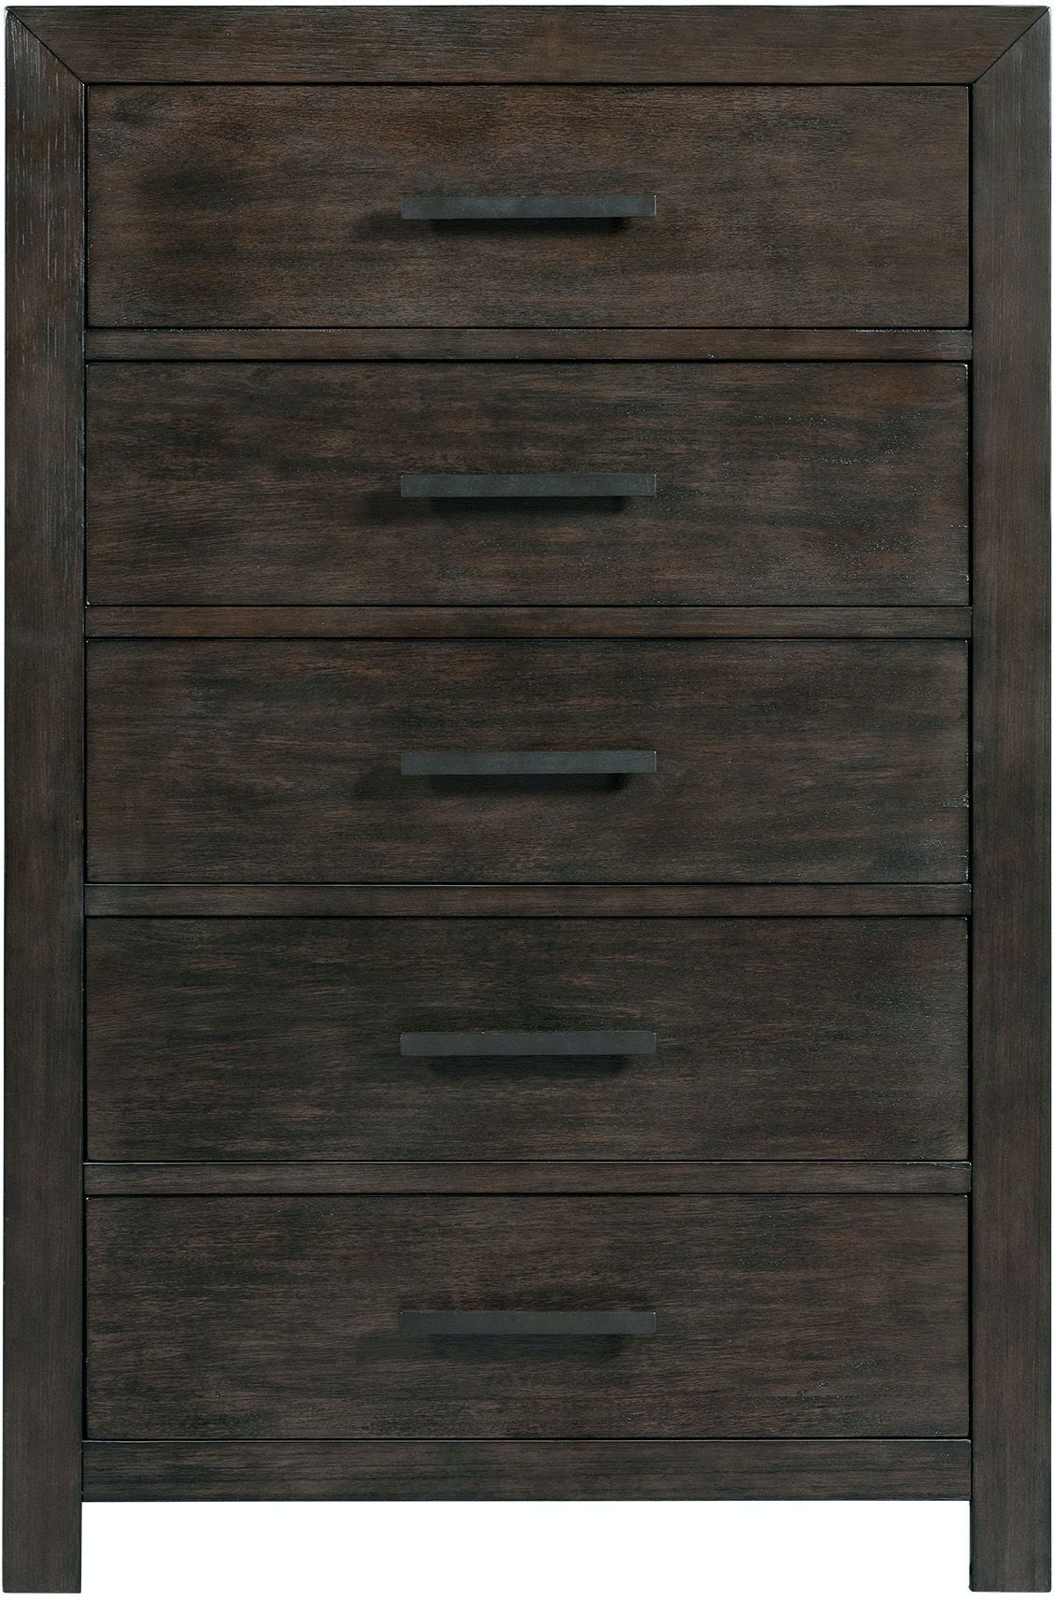 Picture of Elements Shelby Chest of Drawers